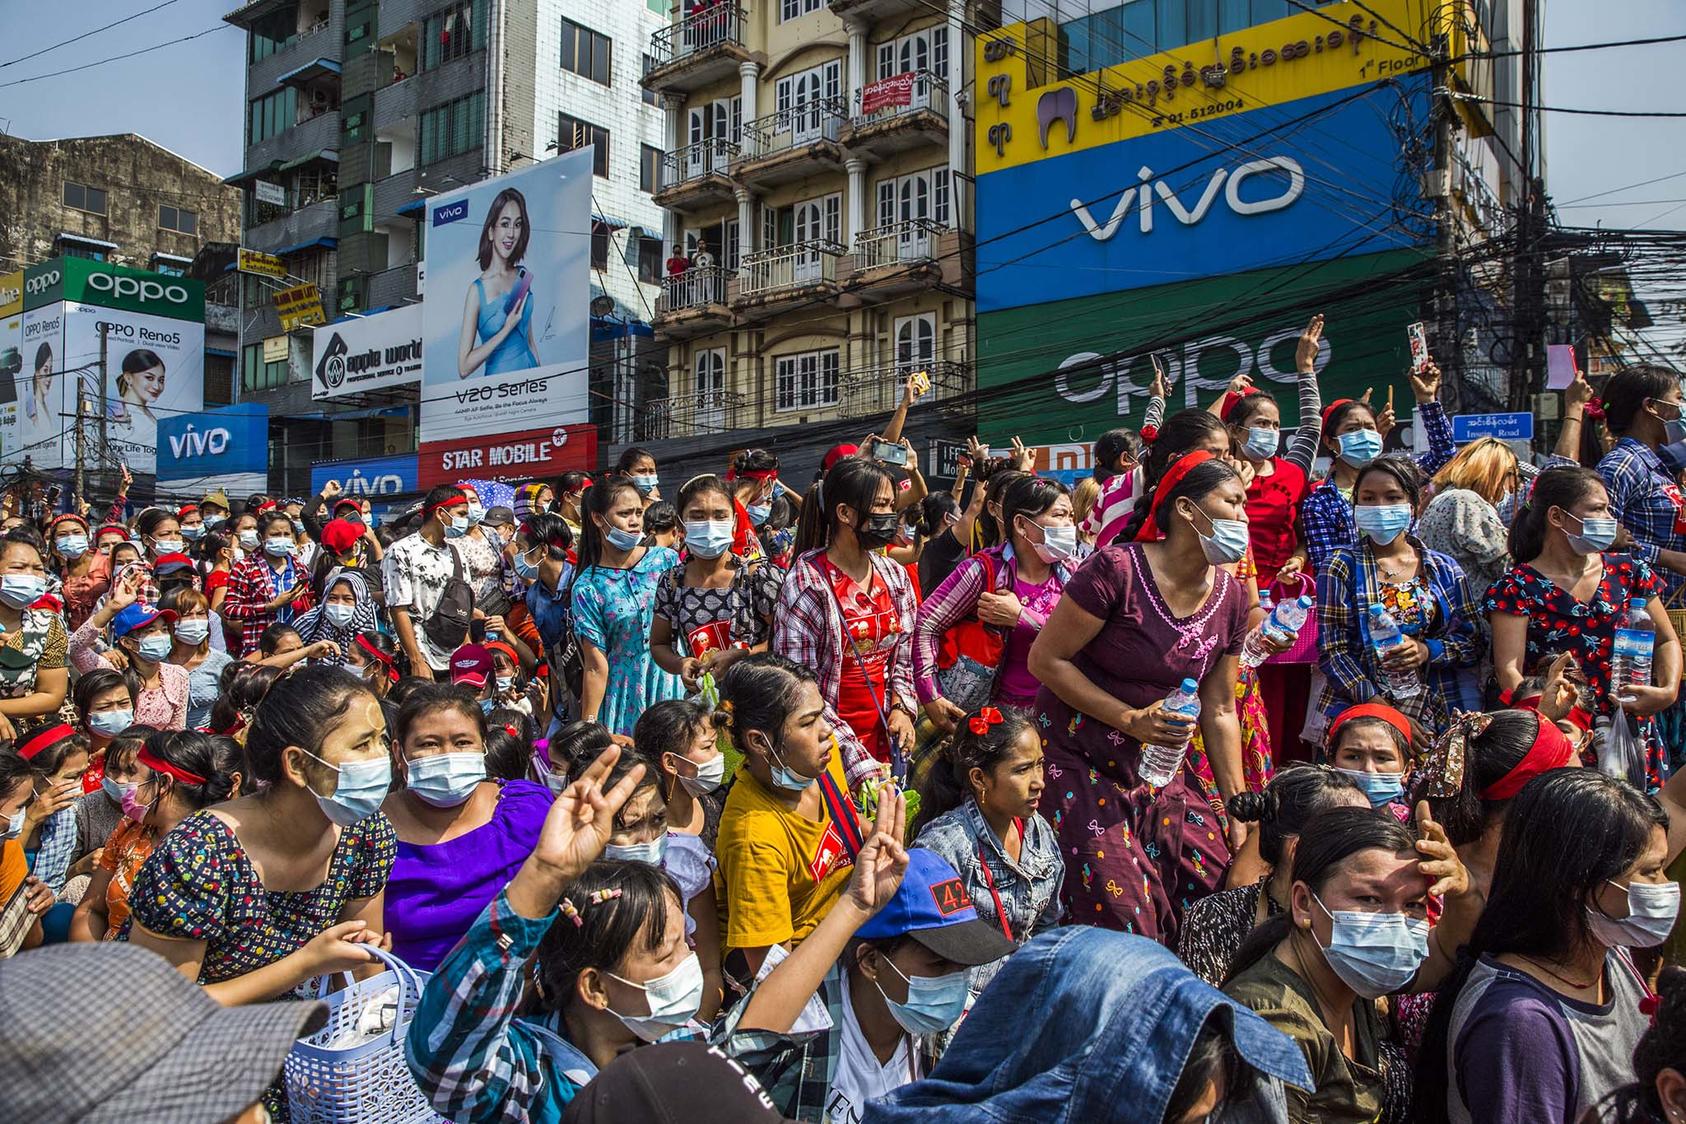 People protest the recent military coup, in Yangon, Myanmar, on Feb. 6, 2021. Despite the danger, women have been at the forefront of the protest movement, rebuking the generals who ousted a female civilian leader. (The New York Times)